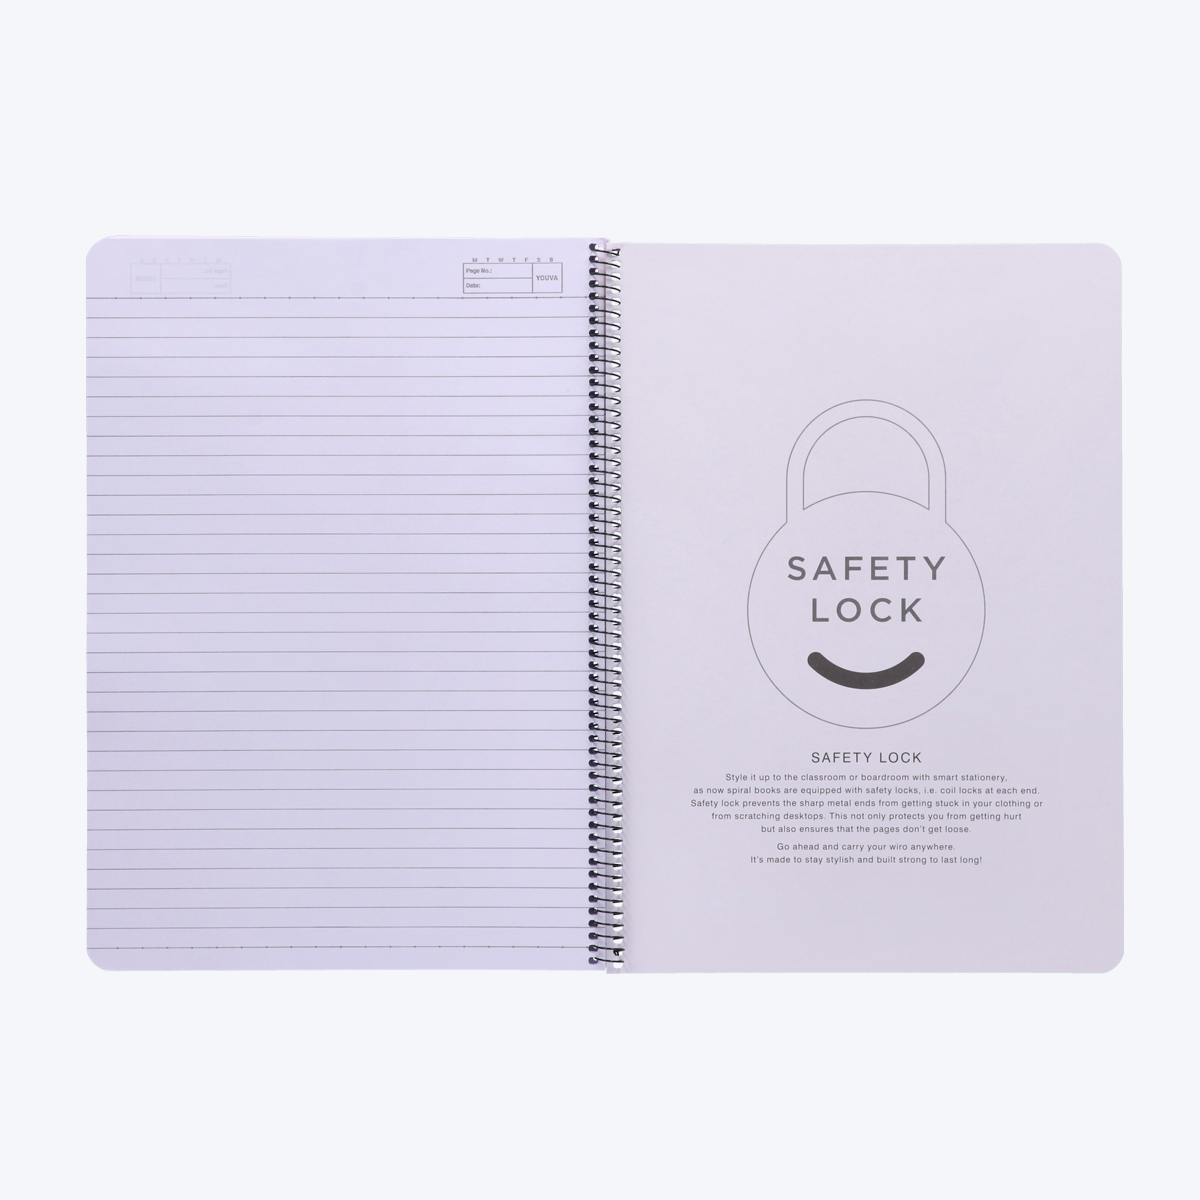 Navneet Youva | Spiral Long Book for students and executives | Spiral Bound with safety lock | A4 size - 21 x 29.7 cm | Single Line | 200 Pages | Pack of 1